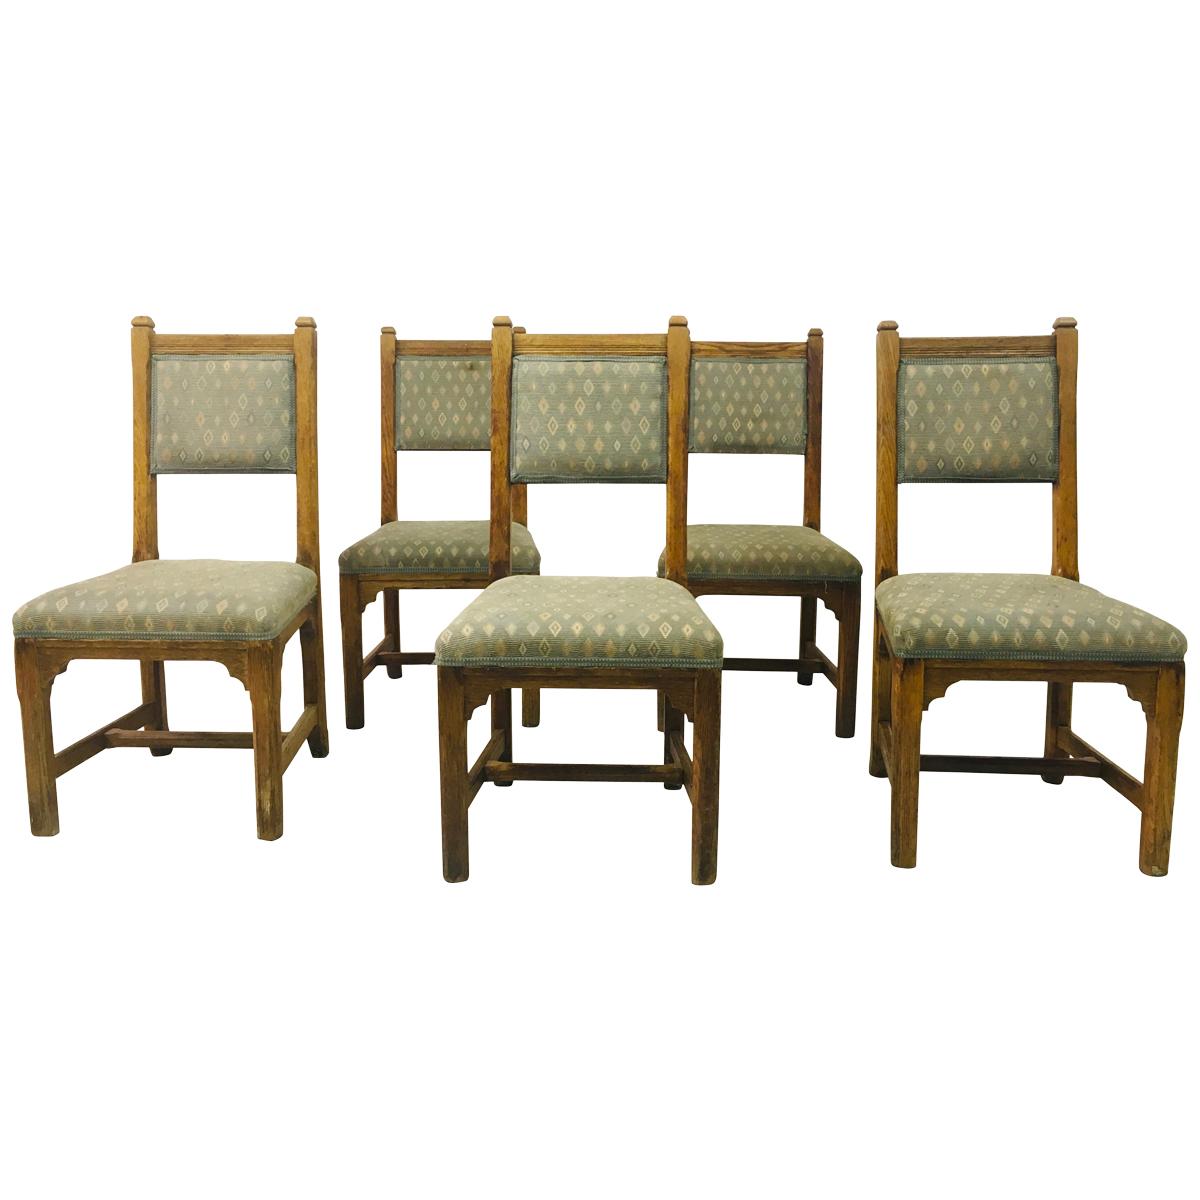 Set of Five Antique Oak Chairs by Howard and Sons